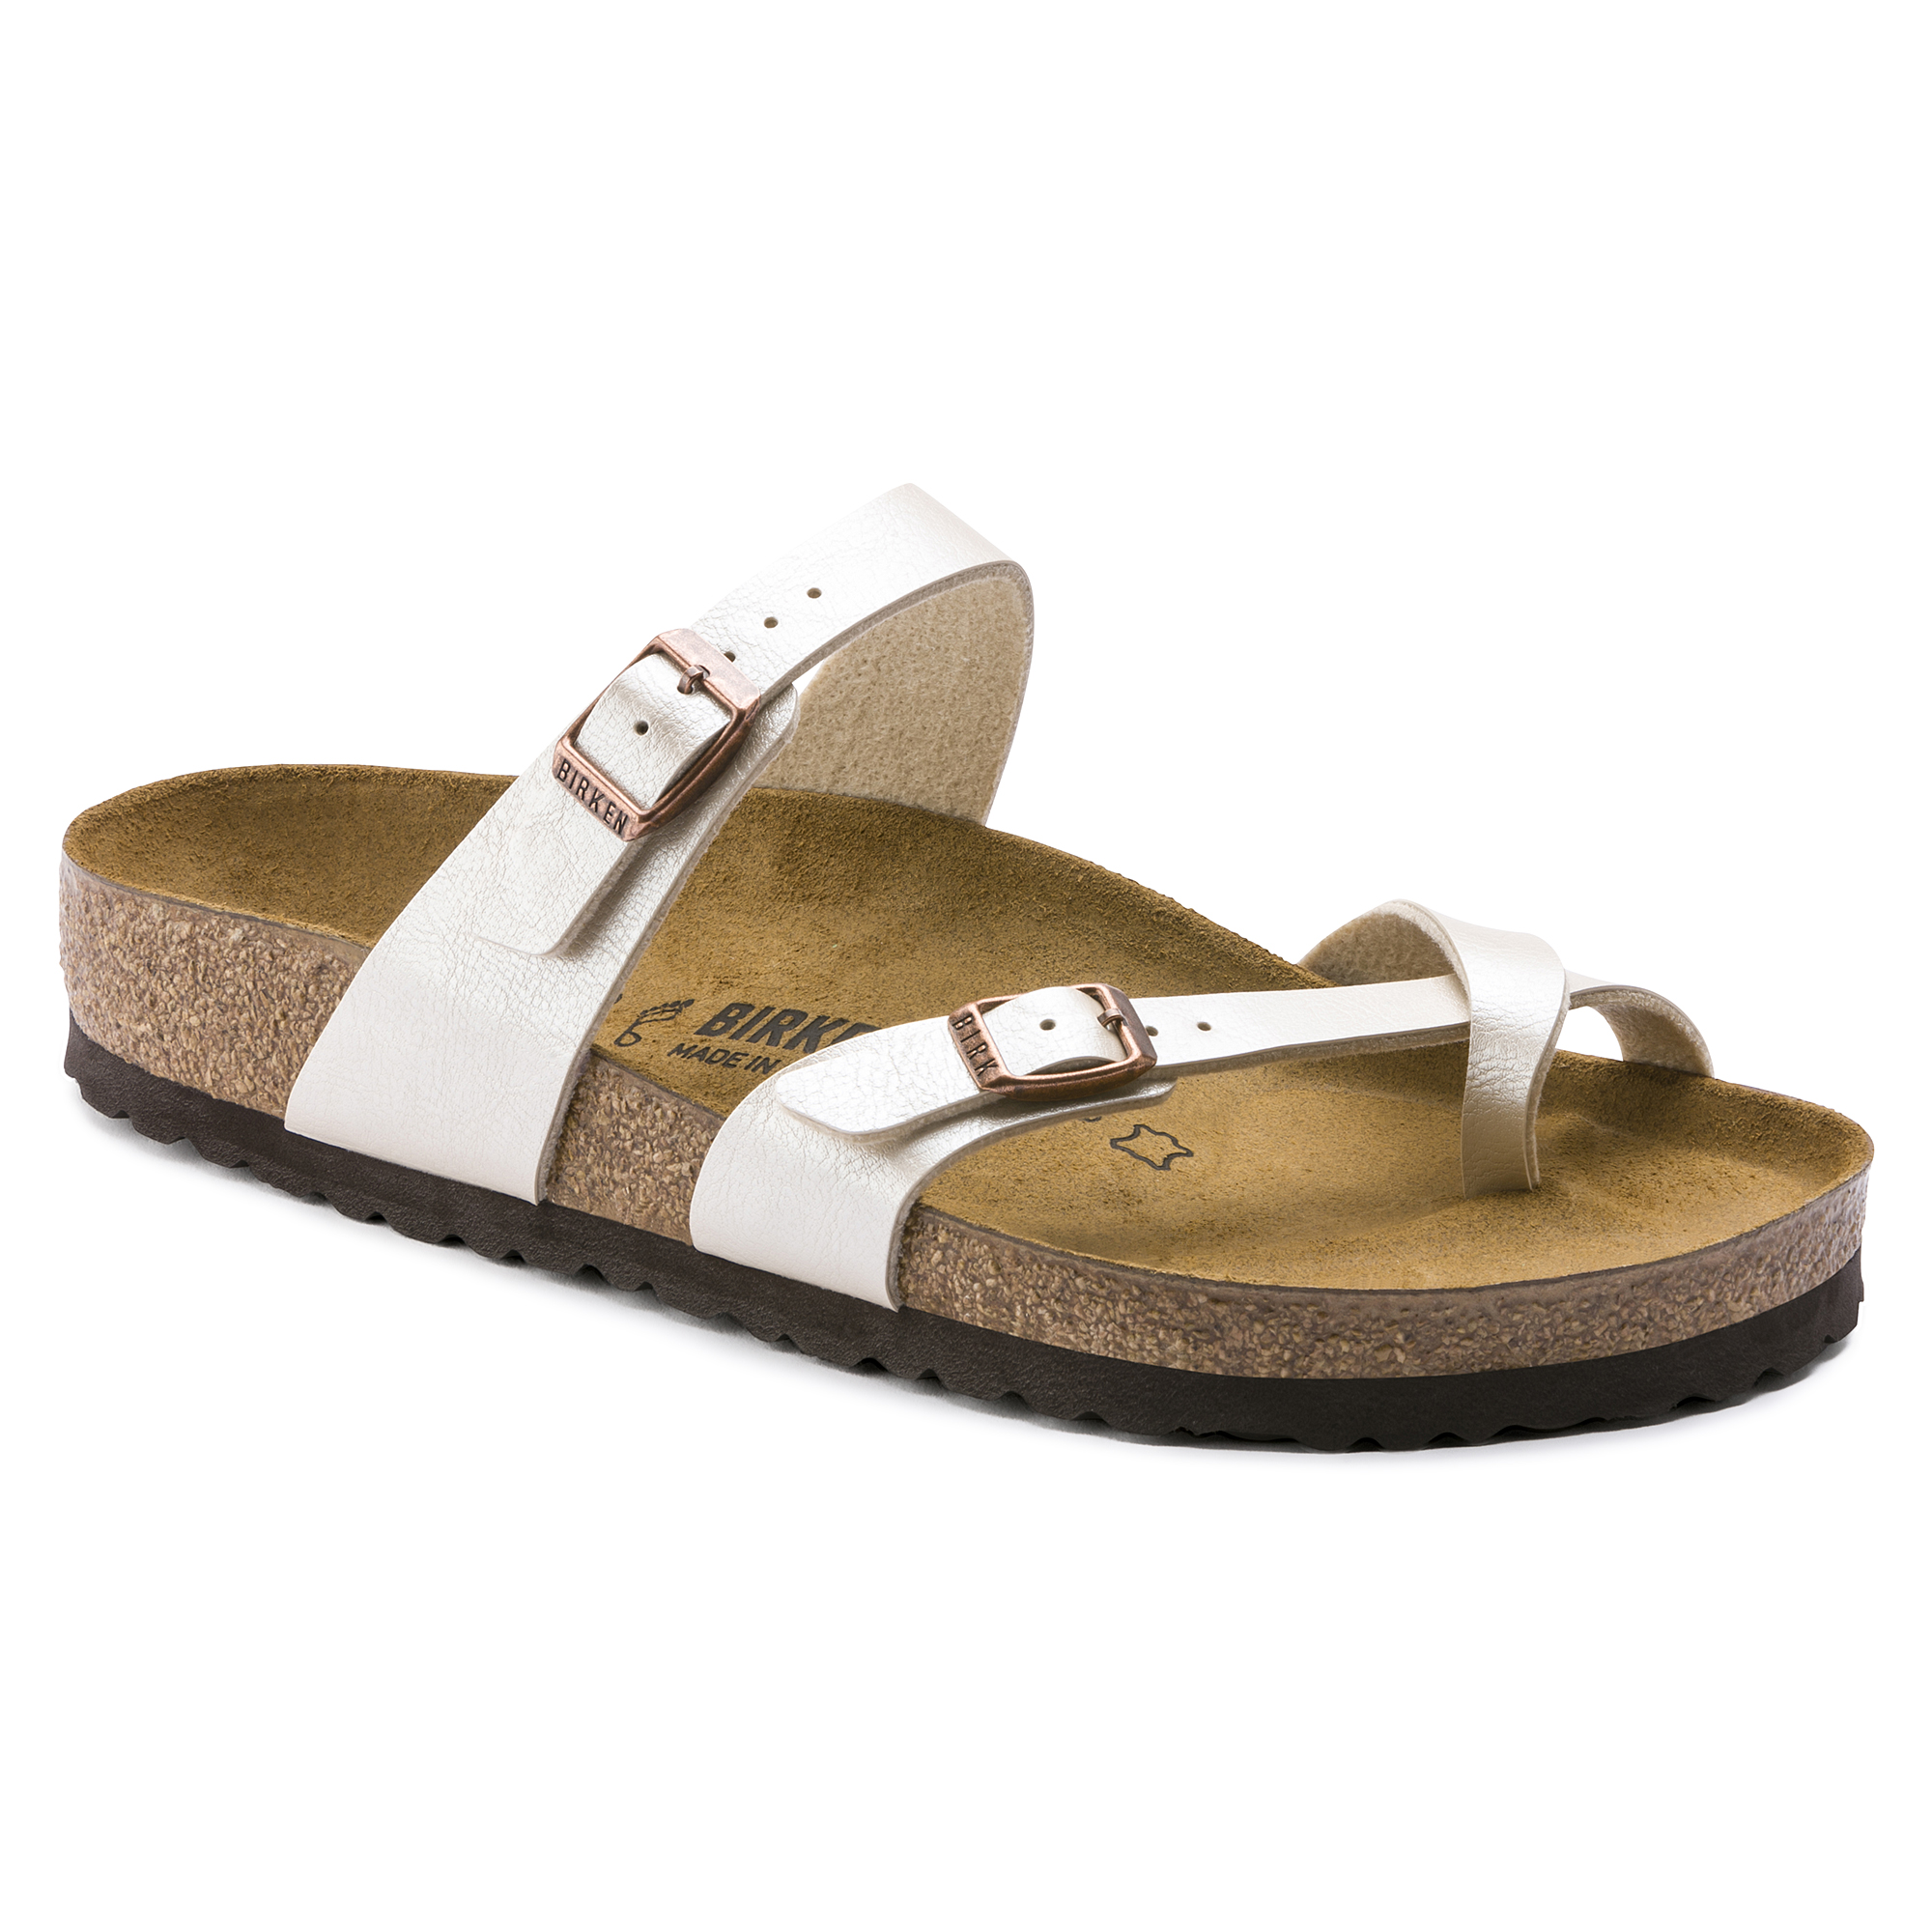 birkenstocks with toe loop and ankle strap